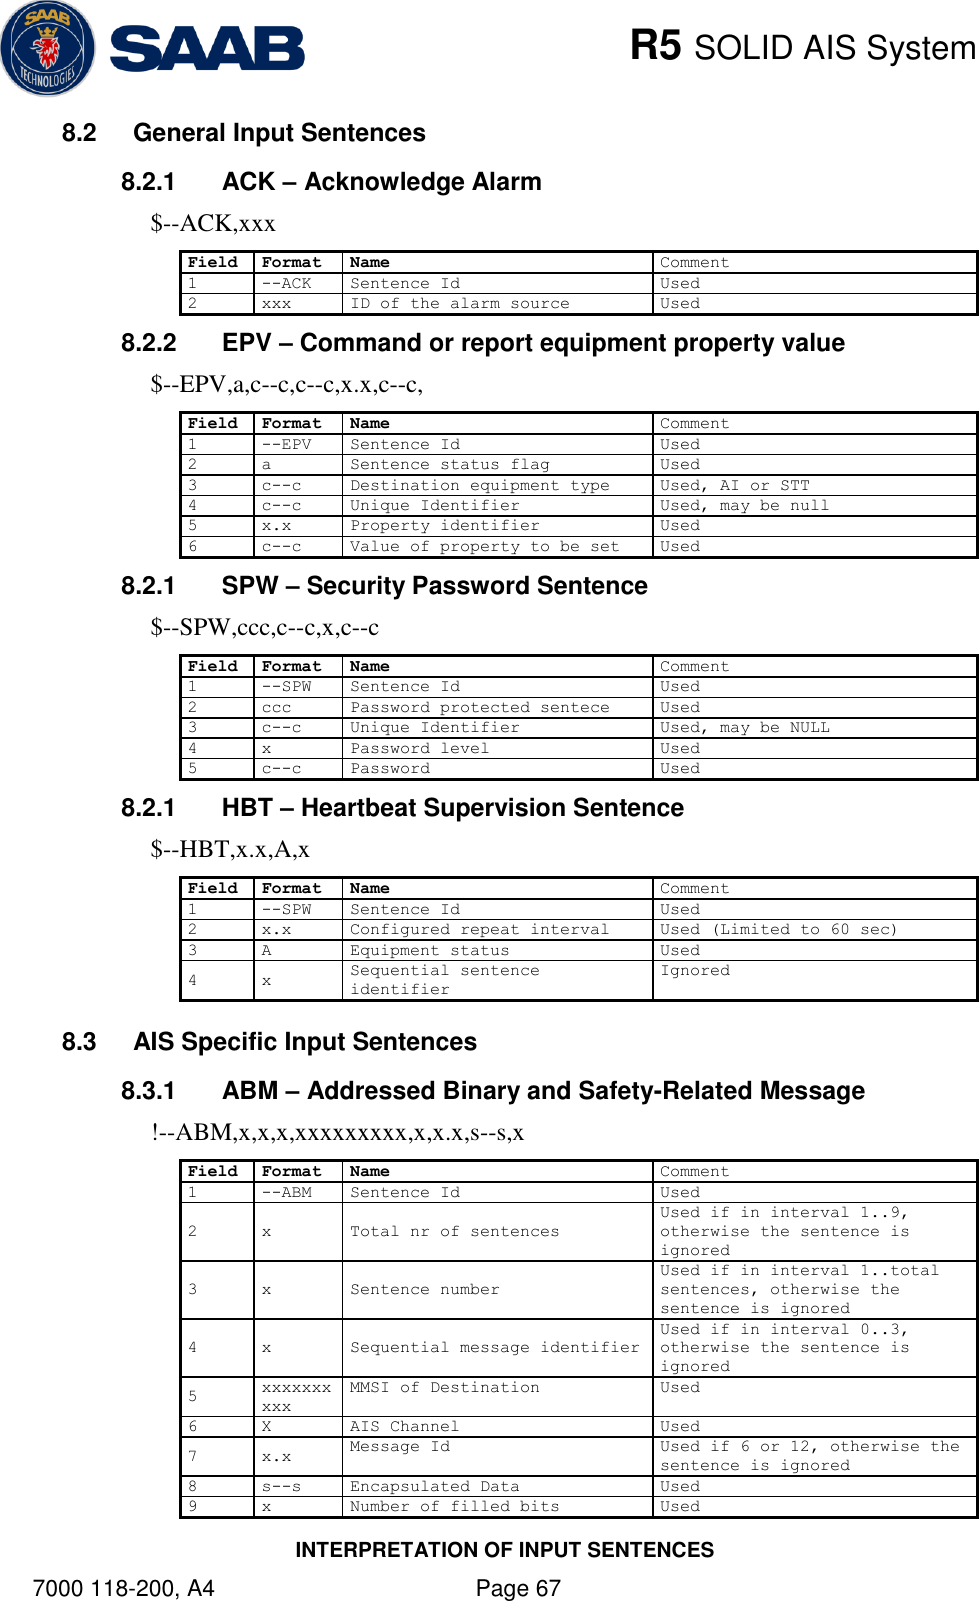    R5 SOLID AIS System INTERPRETATION OF INPUT SENTENCES 7000 118-200, A4    Page 67 8.2  General Input Sentences 8.2.1  ACK – Acknowledge Alarm $--ACK,xxx Field Format Name Comment 1 --ACK Sentence Id Used 2 xxx ID of the alarm source Used 8.2.2  EPV – Command or report equipment property value $--EPV,a,c--c,c--c,x.x,c--c, Field Format Name Comment 1 --EPV Sentence Id Used 2 a Sentence status flag Used 3 c--c Destination equipment type Used, AI or STT 4 c--c Unique Identifier Used, may be null 5 x.x Property identifier Used 6 c--c Value of property to be set Used 8.2.1  SPW – Security Password Sentence $--SPW,ccc,c--c,x,c--c Field Format Name Comment 1 --SPW Sentence Id Used 2 ccc Password protected sentece Used 3 c--c Unique Identifier Used, may be NULL 4 x Password level Used 5 c--c Password Used 8.2.1  HBT – Heartbeat Supervision Sentence $--HBT,x.x,A,x Field Format Name Comment 1 --SPW Sentence Id Used 2 x.x Configured repeat interval Used (Limited to 60 sec) 3 A Equipment status Used 4 x Sequential sentence identifier Ignored 8.3  AIS Specific Input Sentences 8.3.1  ABM – Addressed Binary and Safety-Related Message !--ABM,x,x,x,xxxxxxxxx,x,x.x,s--s,x Field Format Name Comment 1 --ABM Sentence Id Used 2 x Total nr of sentences Used if in interval 1..9, otherwise the sentence is ignored 3 x Sentence number Used if in interval 1..total sentences, otherwise the sentence is ignored 4 x Sequential message identifier Used if in interval 0..3, otherwise the sentence is ignored 5 xxxxxxxxxx MMSI of Destination Used 6 X AIS Channel Used 7 x.x Message Id Used if 6 or 12, otherwise the sentence is ignored 8 s--s Encapsulated Data Used 9 x Number of filled bits Used 